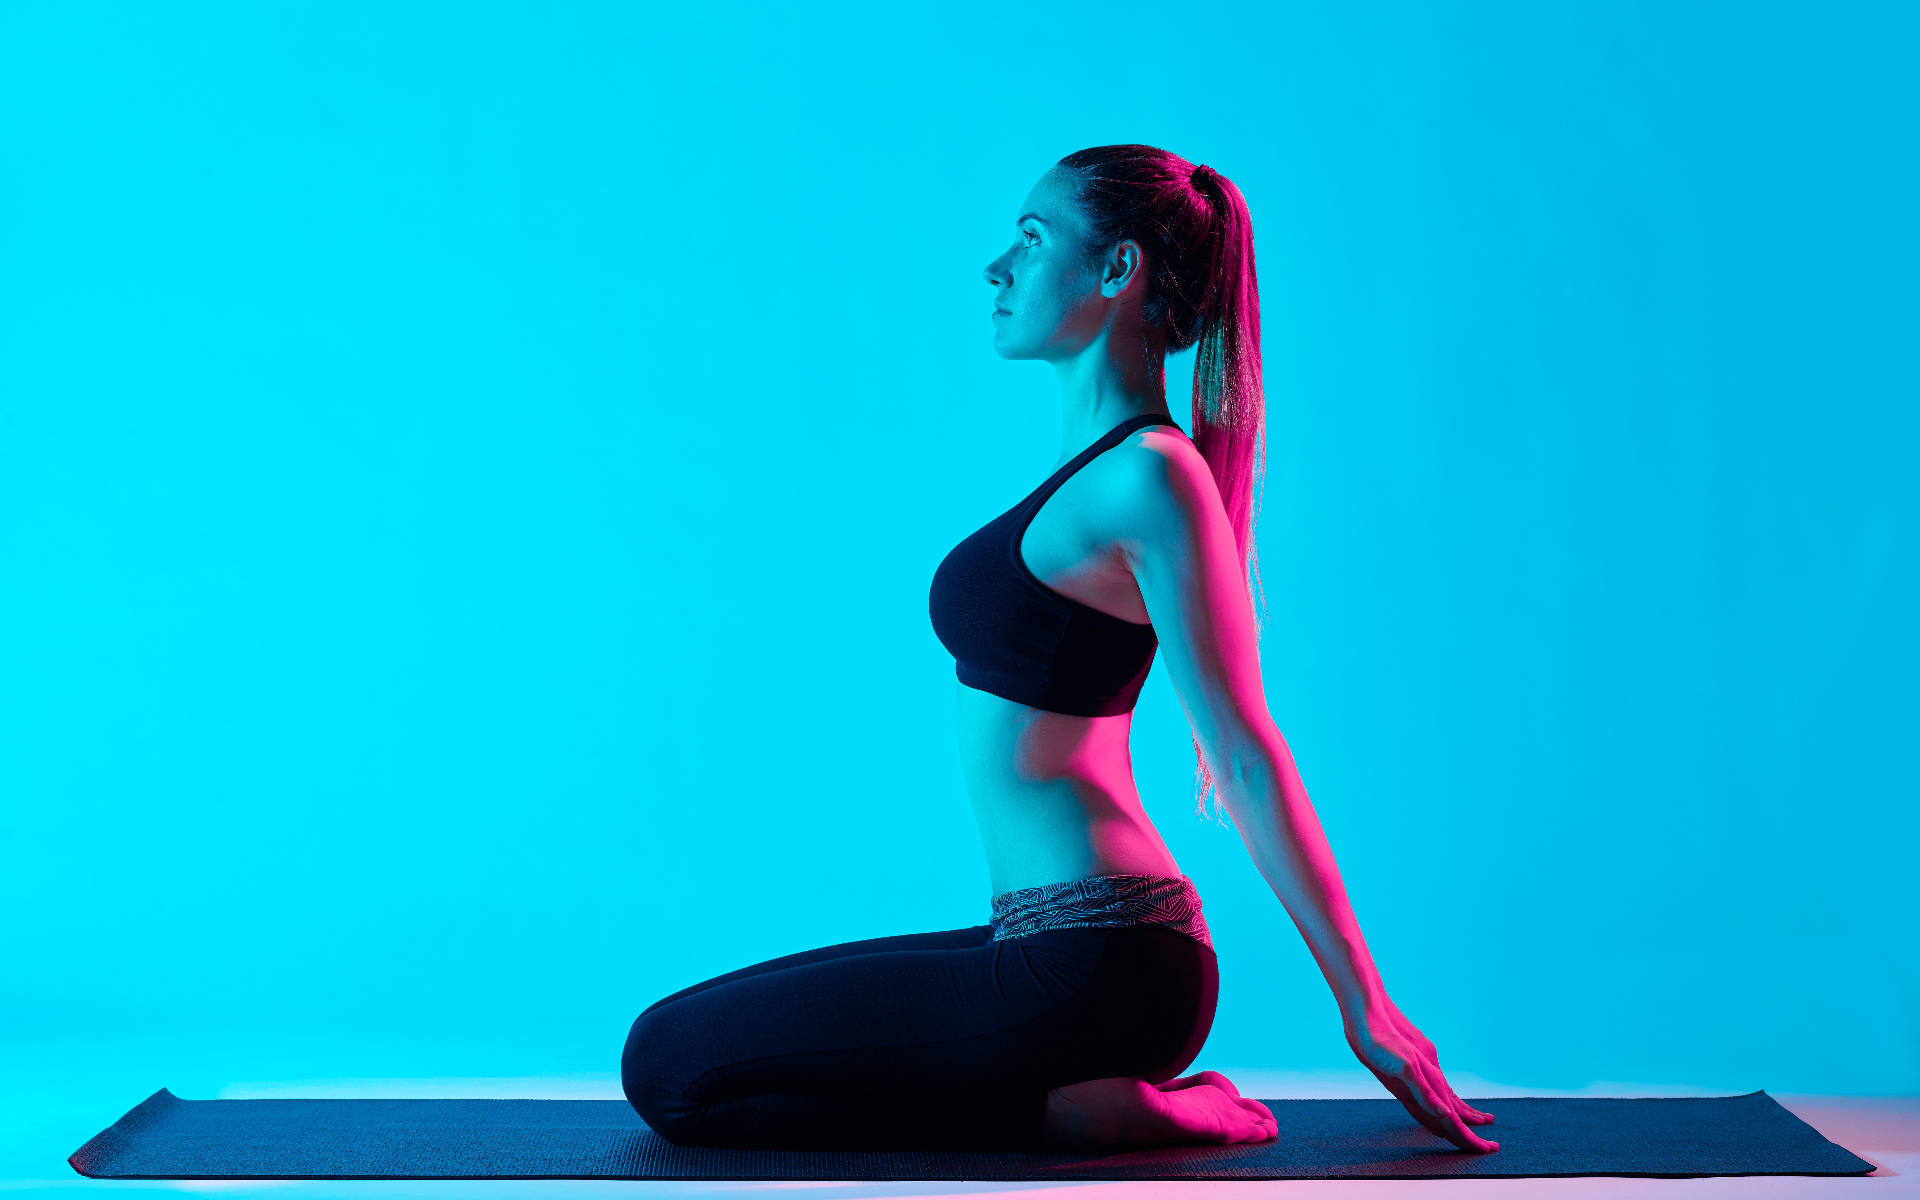 Yoga Woman With Blue Light Background